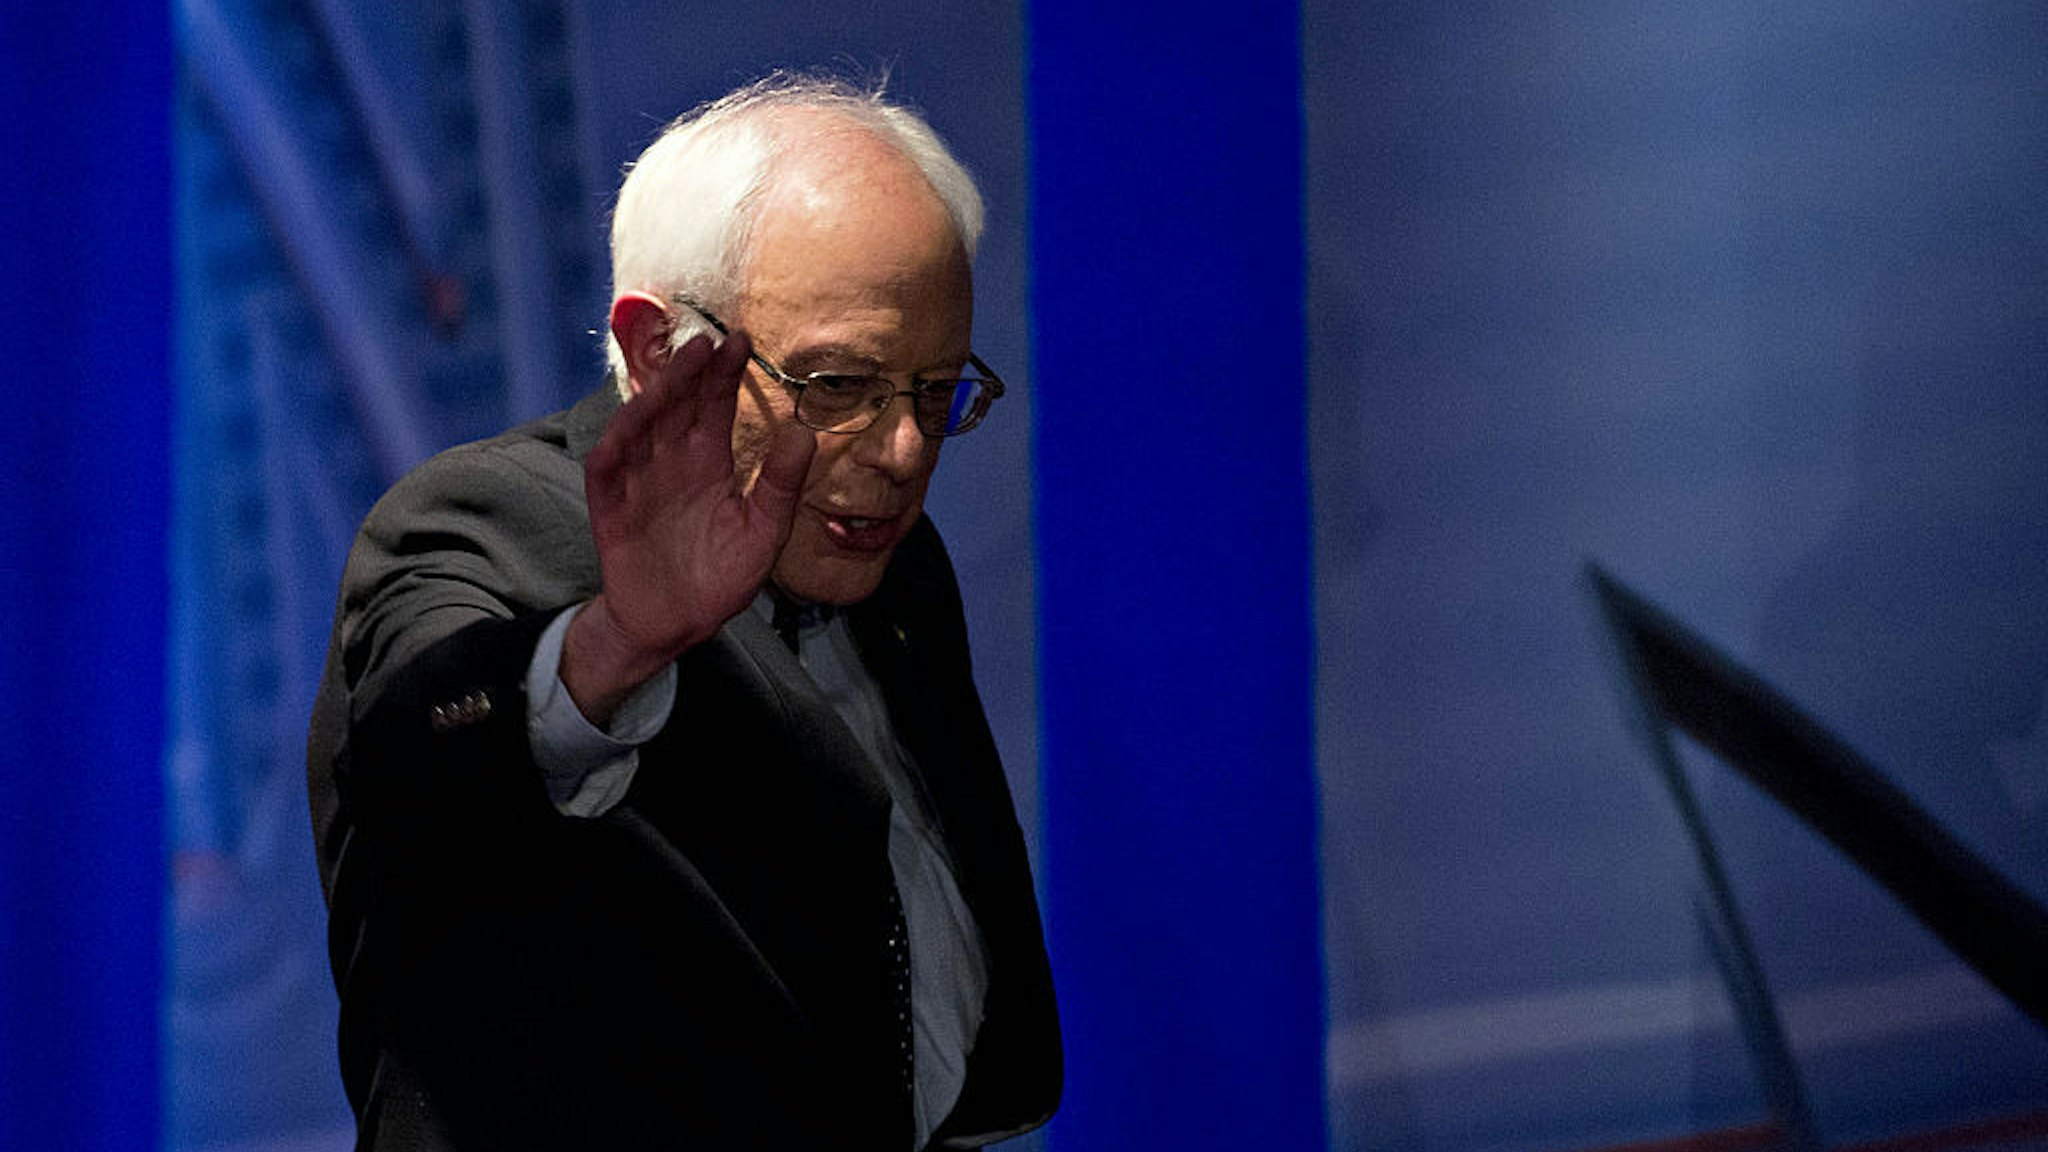 Senator Bernie Sanders, an independent from Vermont and 2016 Democratic presidential candidate, waves while walking off stage after speaking during a Democratic presidential town hall hosted by CNN and the New Hampshire Democratic Party at the Derry Opera House in Derry, New Hampshire, U.S., on Wednesday, Feb. 3, 2016. Even with the close contest in Iowa and with Sanders favored to win New Hampshire on Feb. 9, Hillary Clinton remains the candidate with the best odds of capturing the Democratic nomination for president as the campaign moves into more favorable territory, starting Feb. 27 in South Carolina. Photographer: Andrew Harrer/Bloomberg